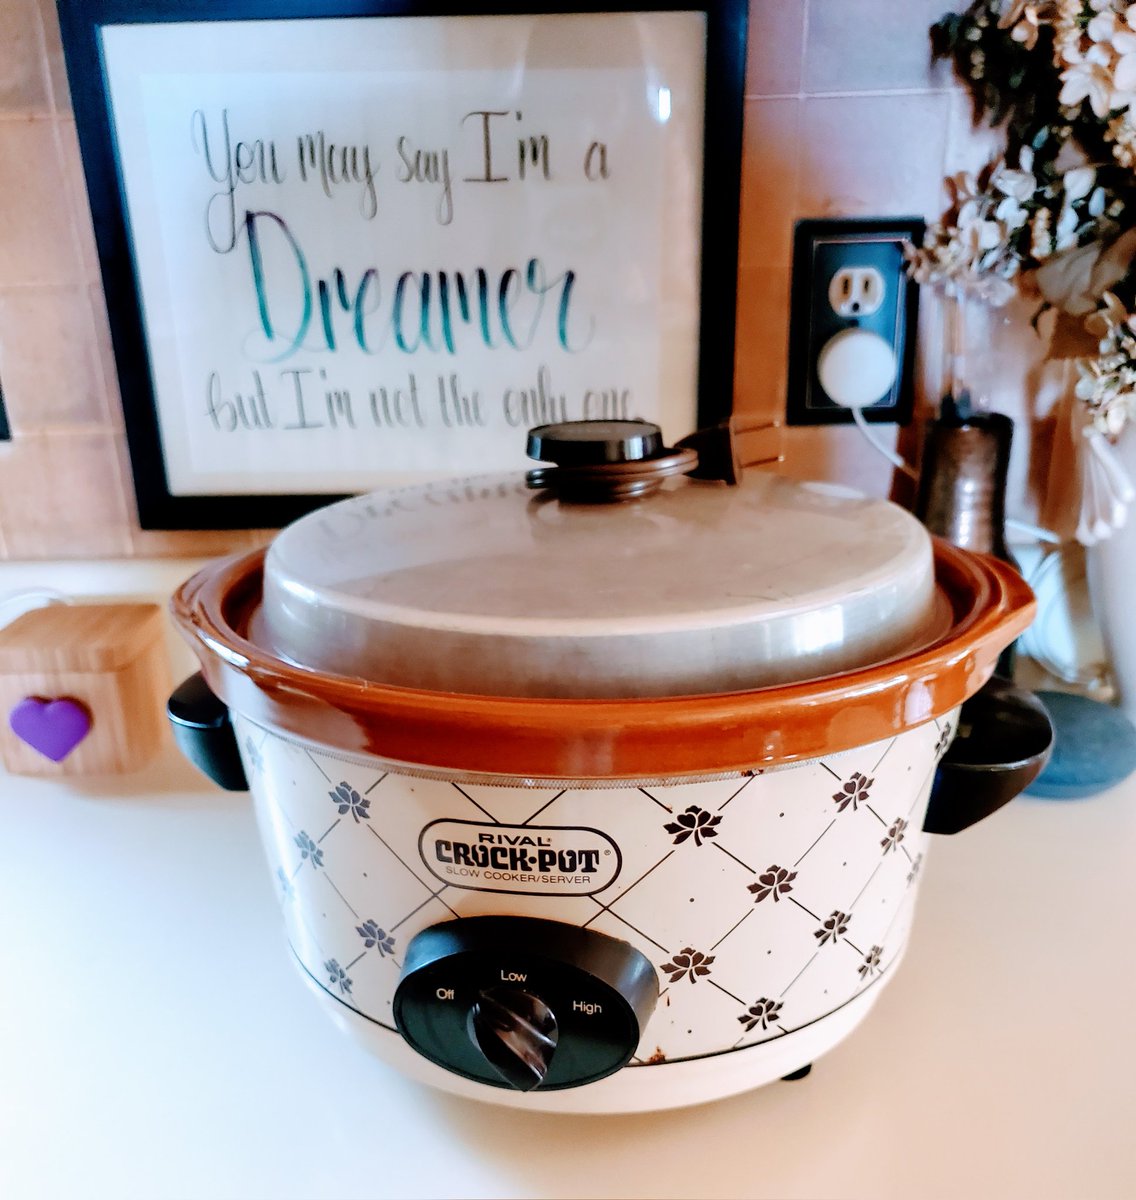 This pot has served me well for 40+ yrs! Don't know whether to laugh or cry at that realization 🎭🤣
#rivalcrockpot  #gettingold  #embracingitall